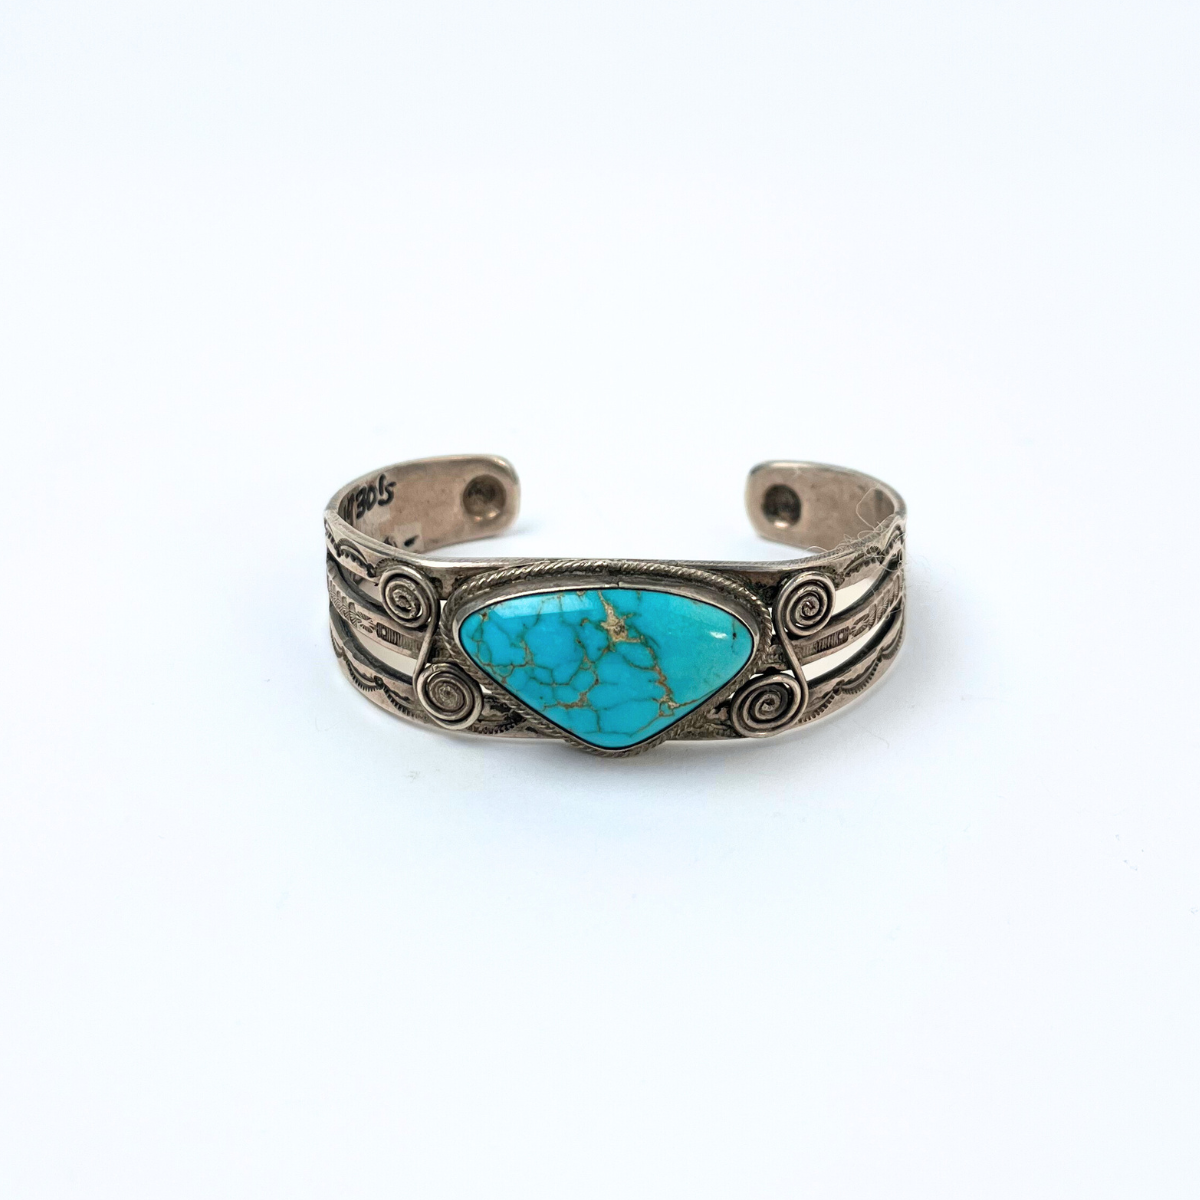 Vintage 1930s Lone Mountain Turquoise Cuff